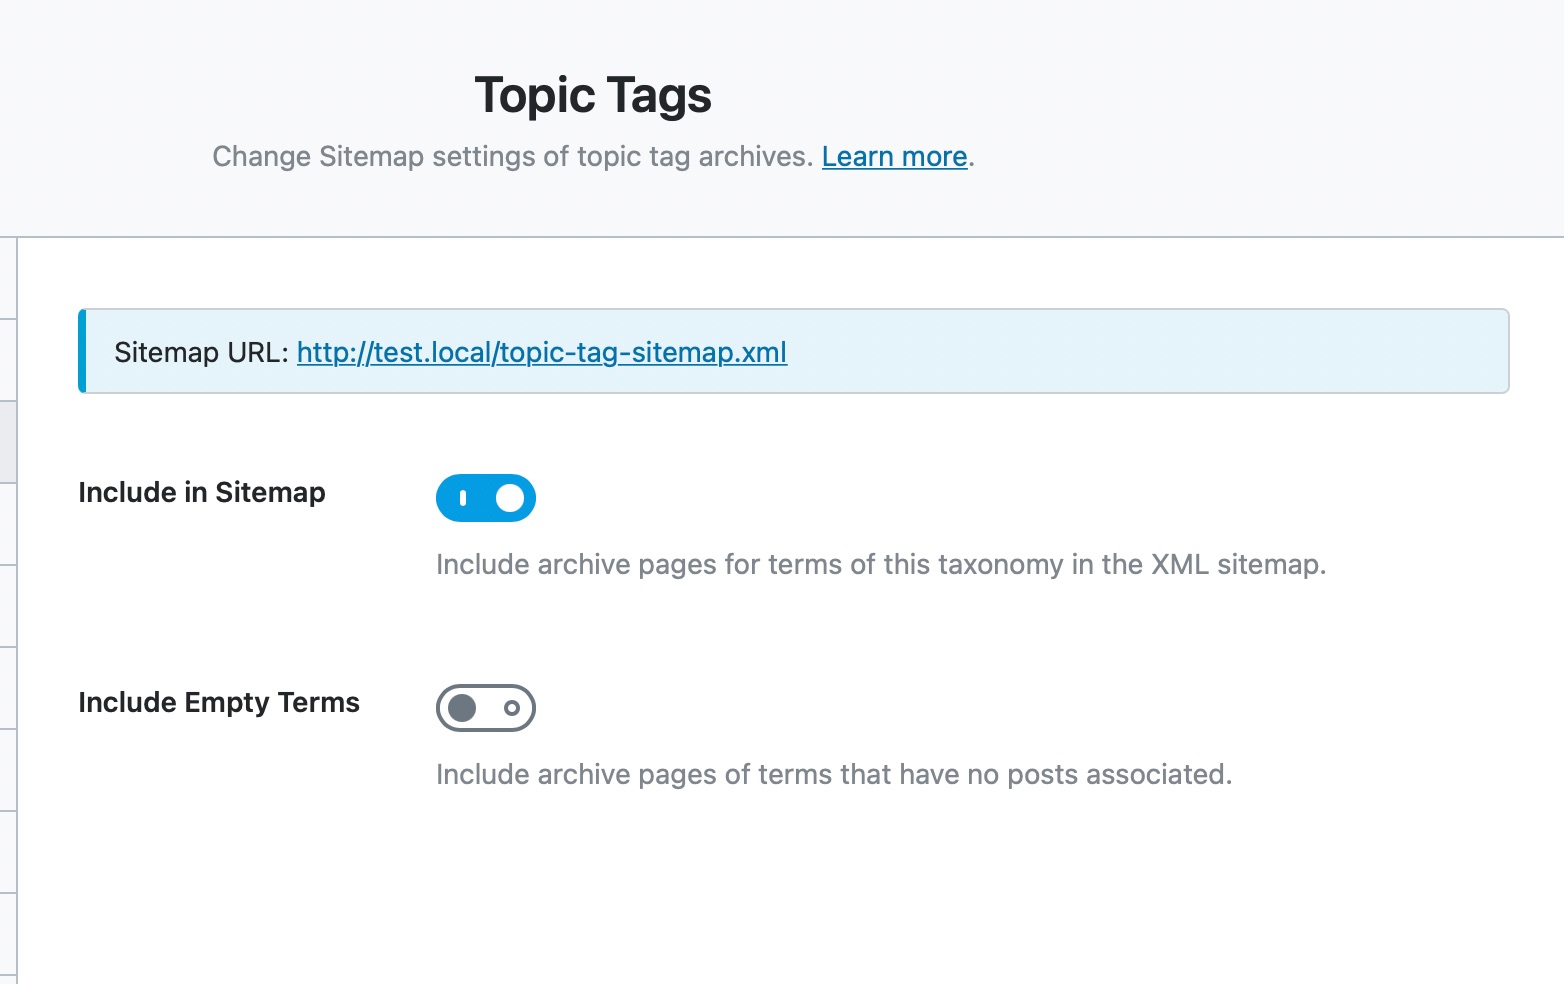 all options in topic tags sitemaps